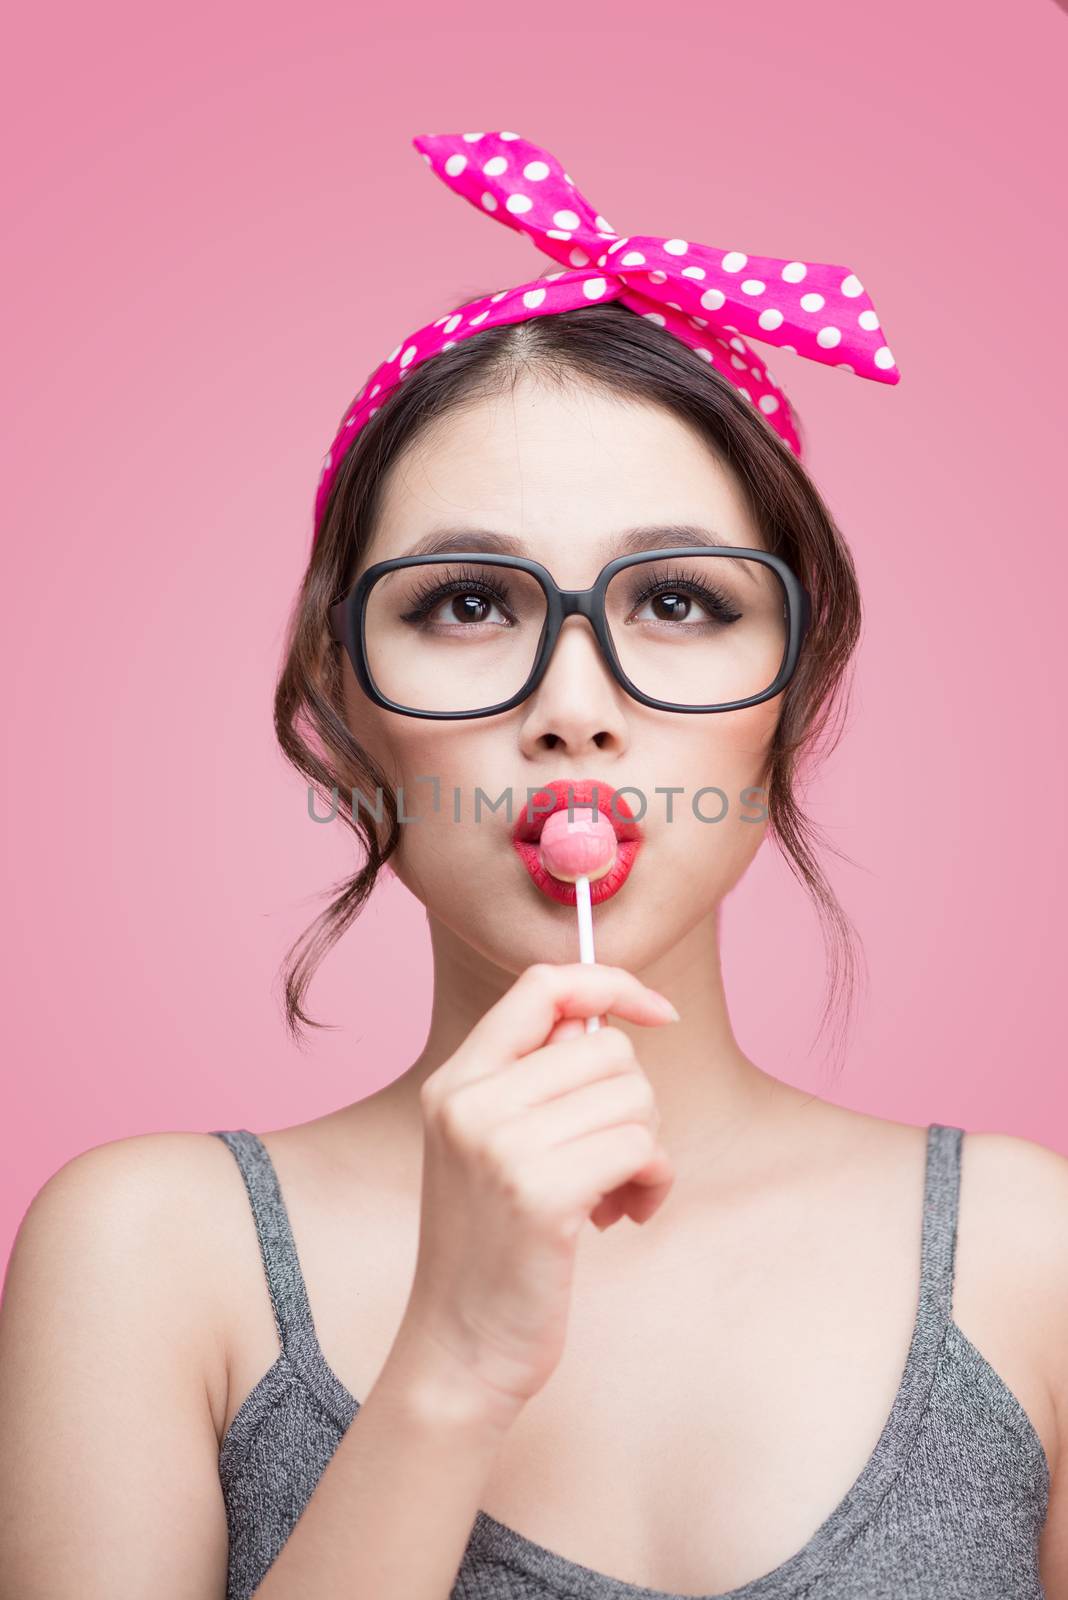 Portrait of beautiful asian woman eating heart shape lollipop, dressed and makeup in pin-up style on pink background.